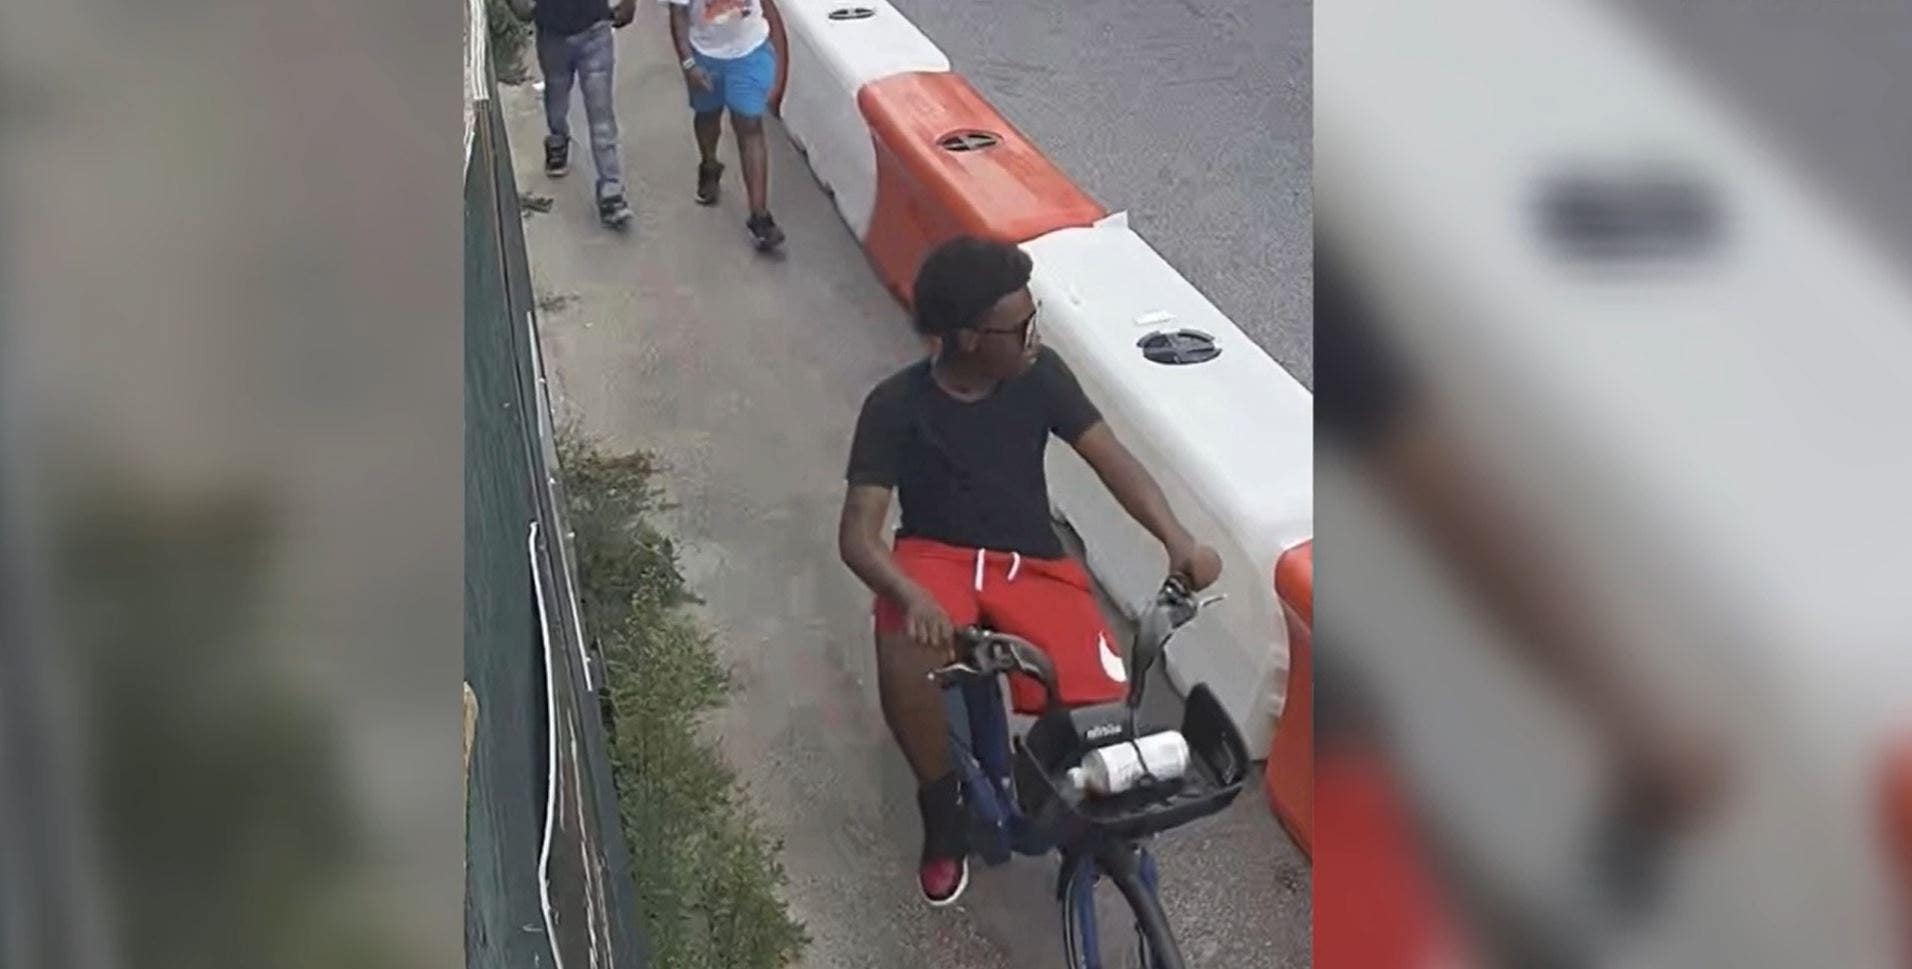 6-year-old NYC girl punched, scooter robbed in broad daylight